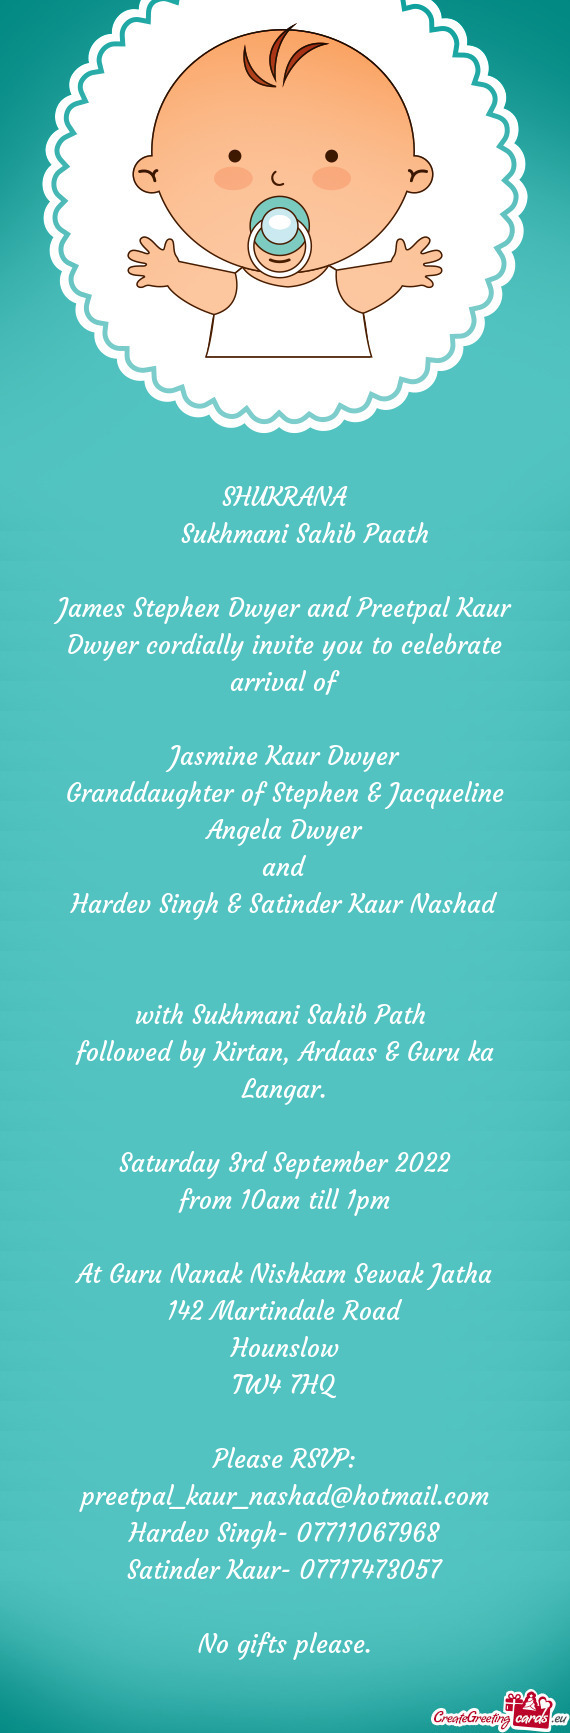 James Stephen Dwyer and Preetpal Kaur Dwyer cordially invite you to celebrate arrival of